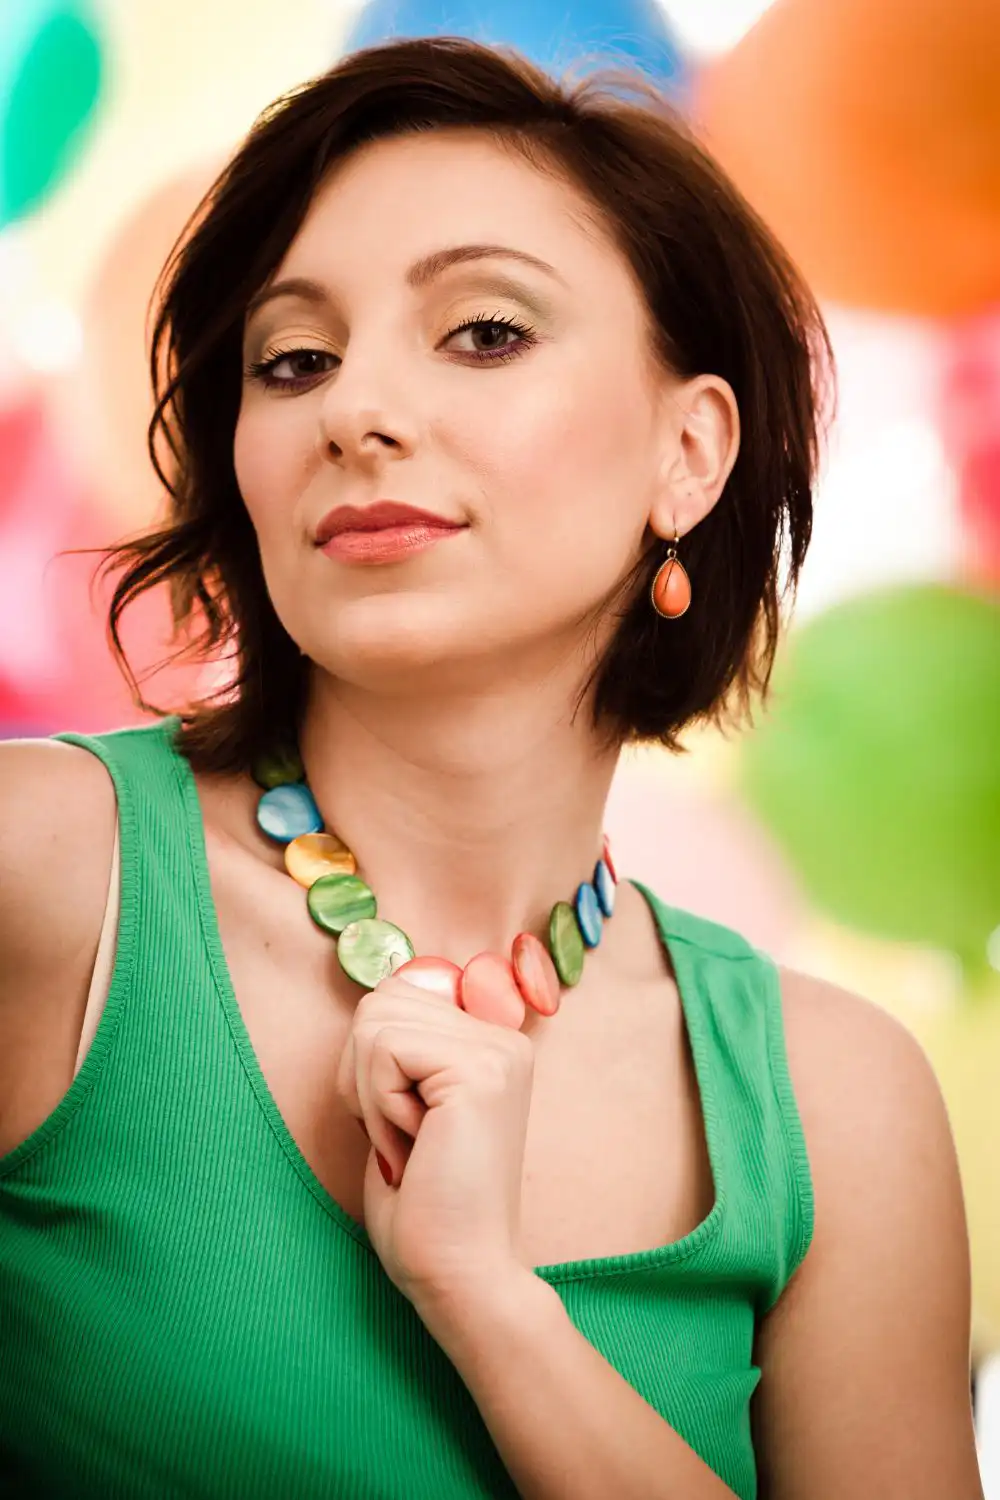 woman holding her colored necklace